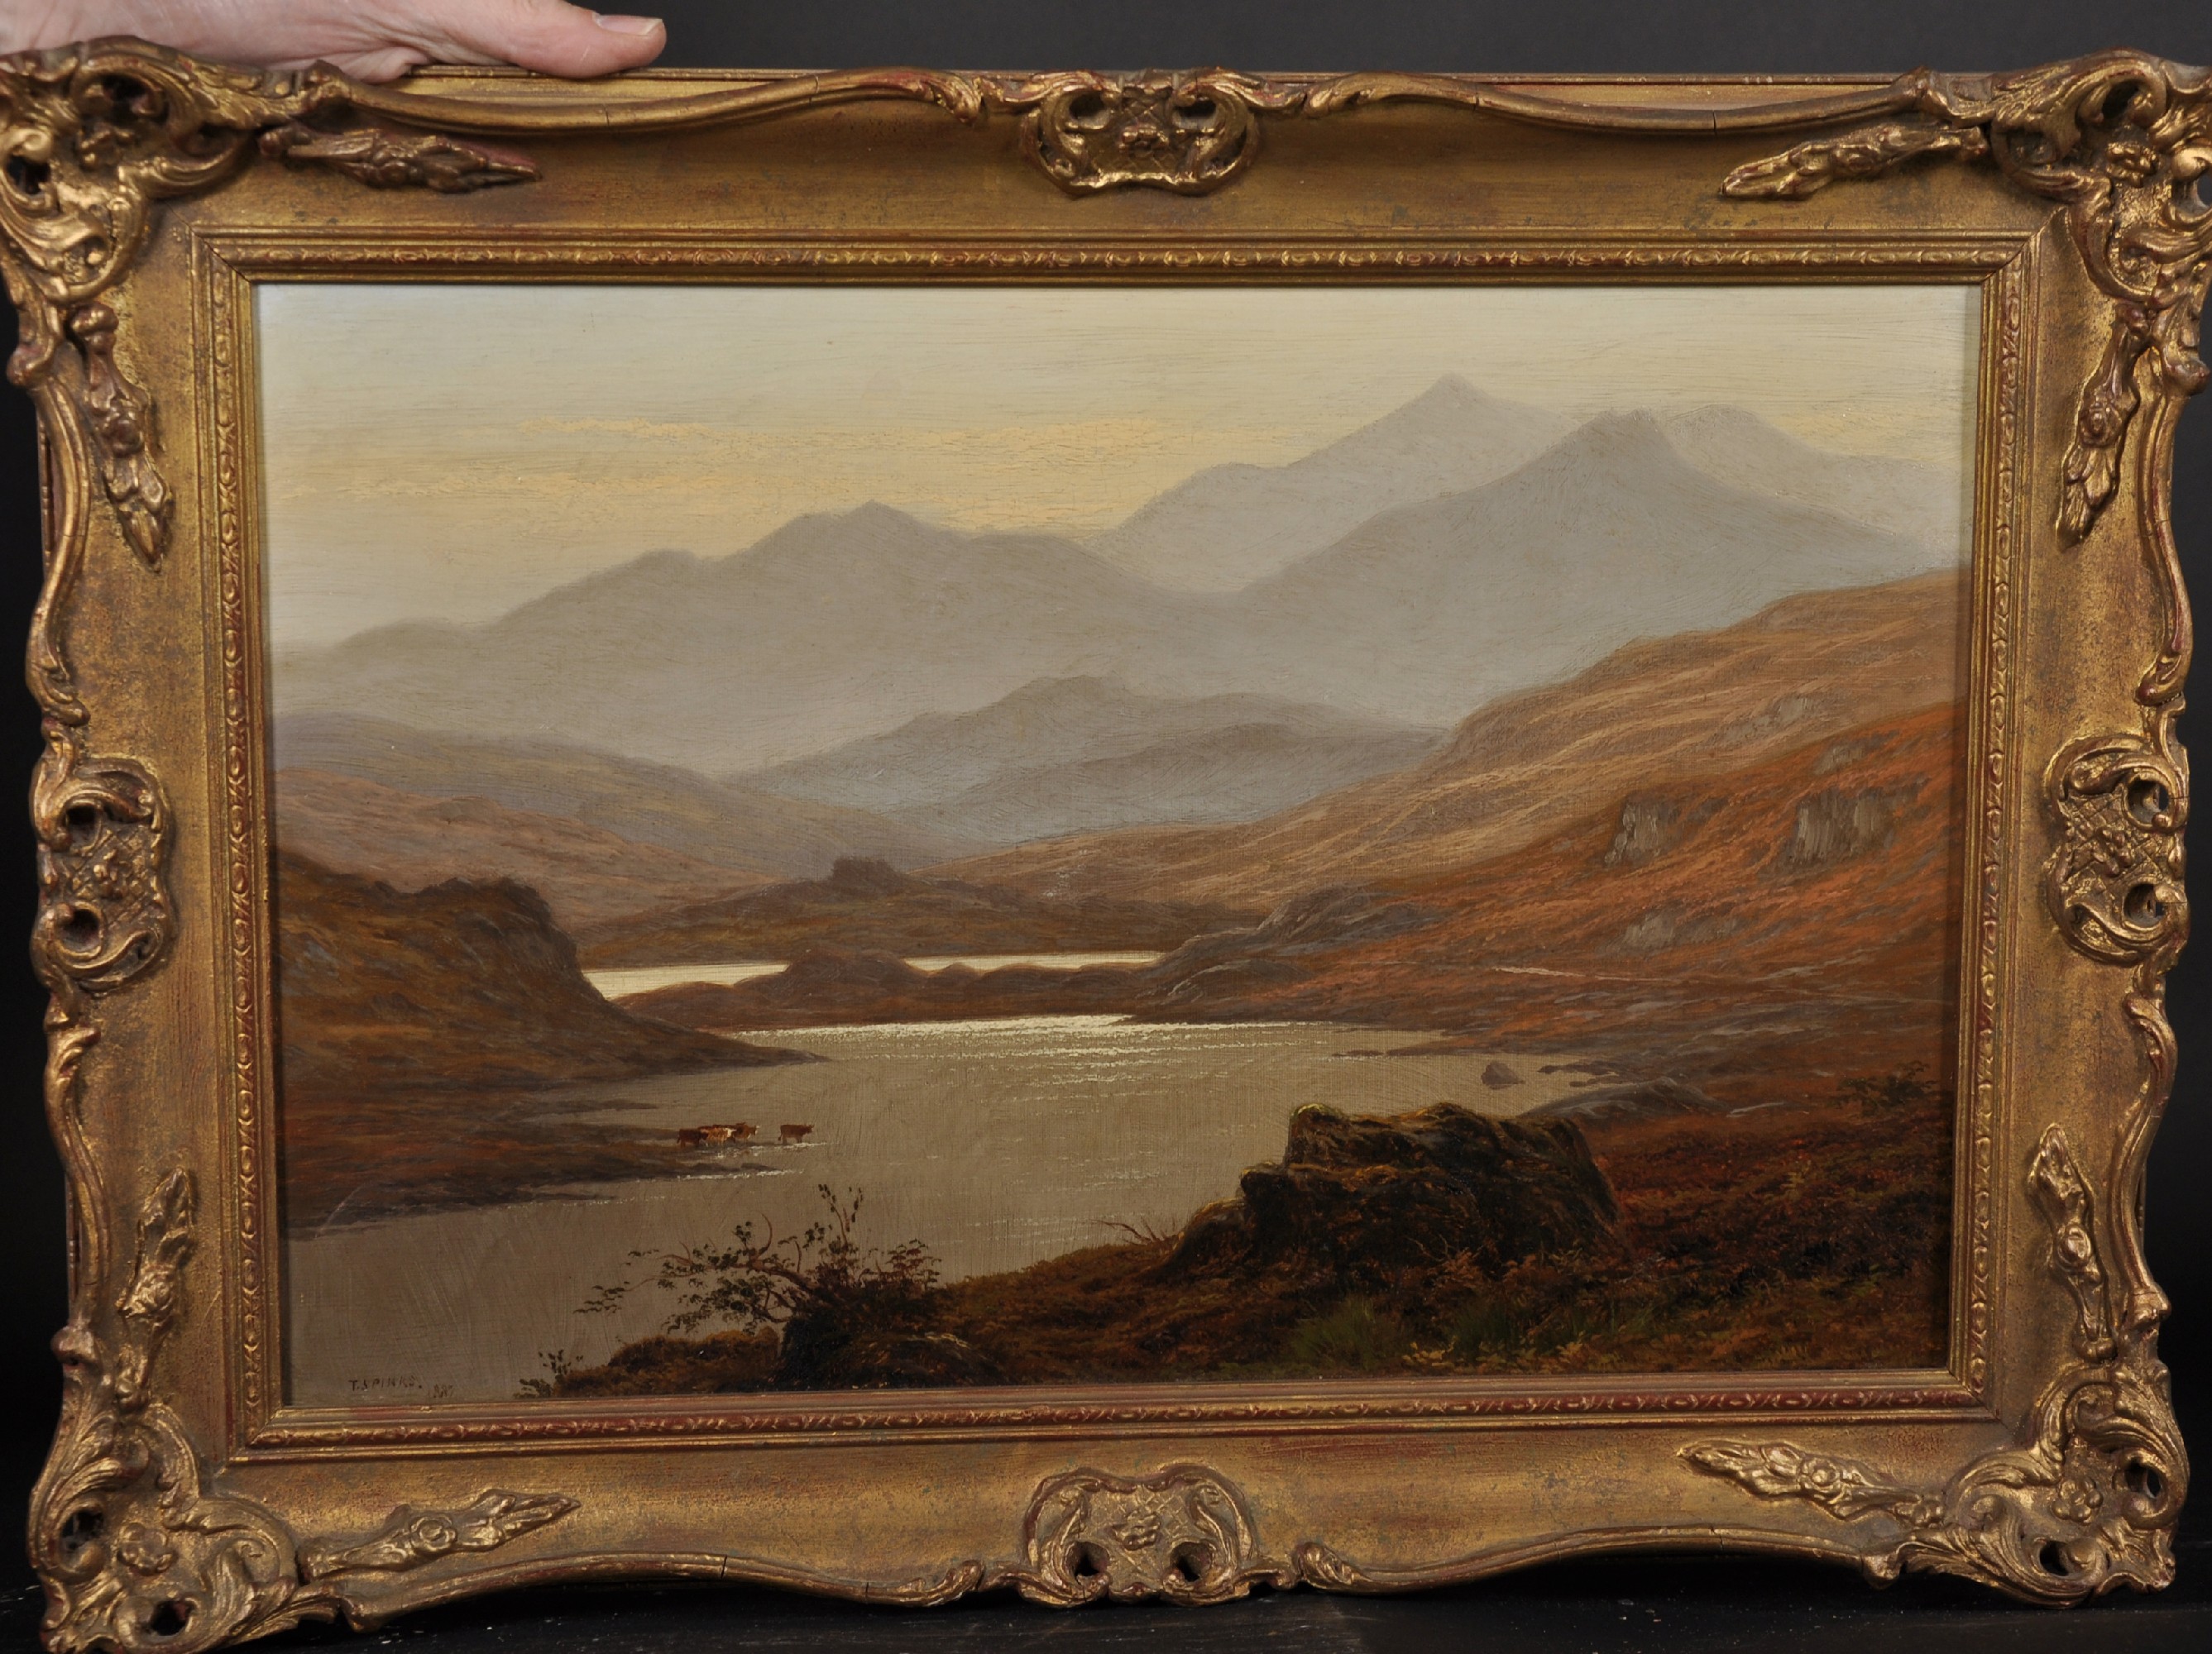 Thomas Spinks (1847-1927) British. "Snowdon from Llyn Llydaw (N.E.)", a Mountainous River Landscape, - Image 2 of 5